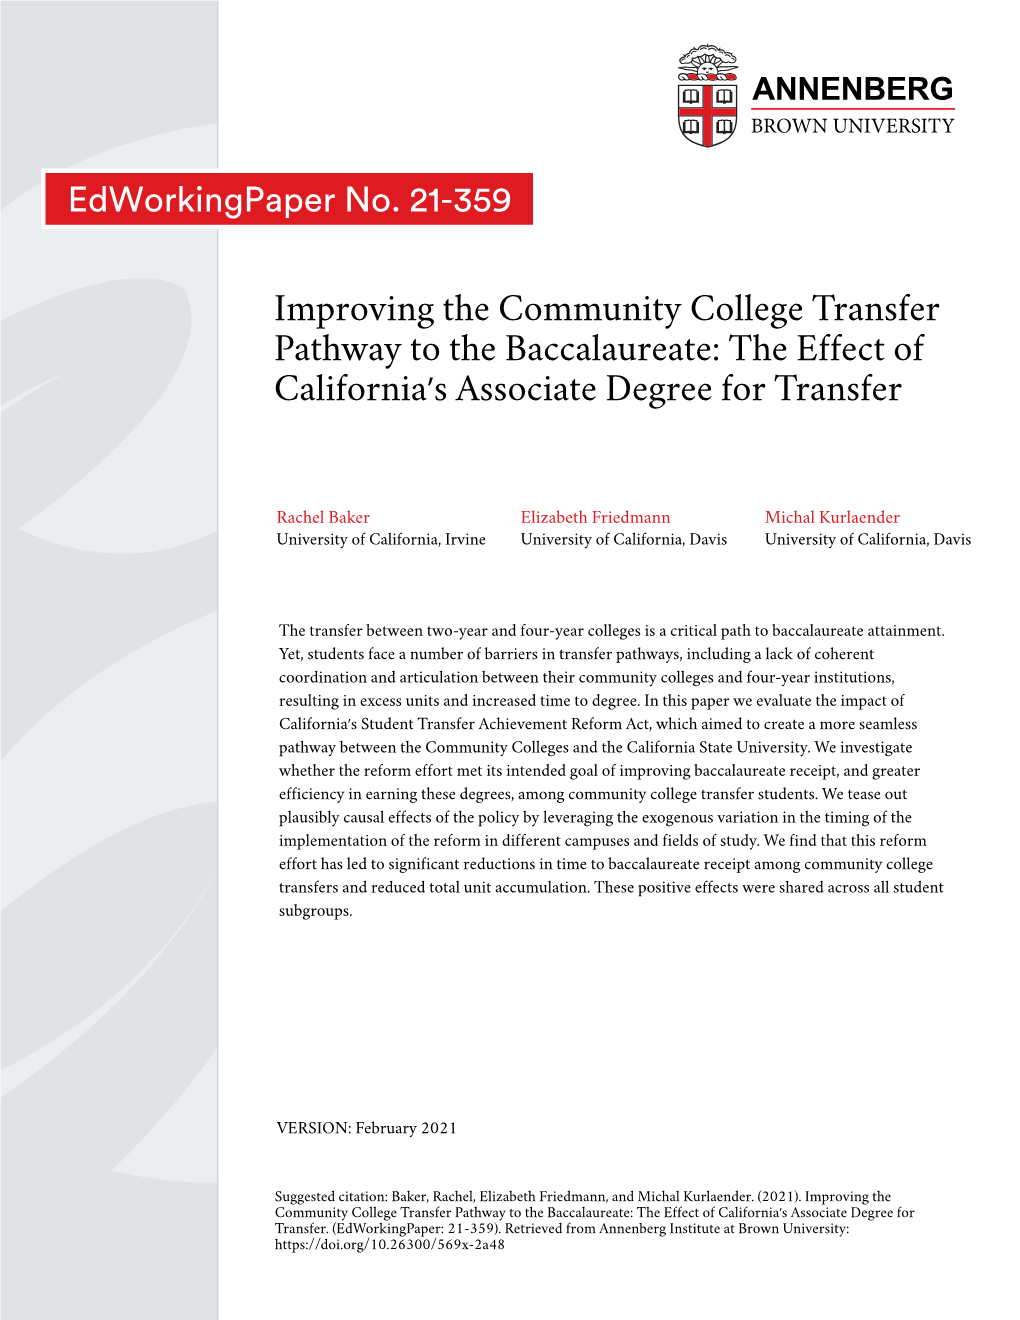 Improving the Community College Transfer Pathway to the Baccalaureate: the Effect of California’S Associate Degree for Transfer